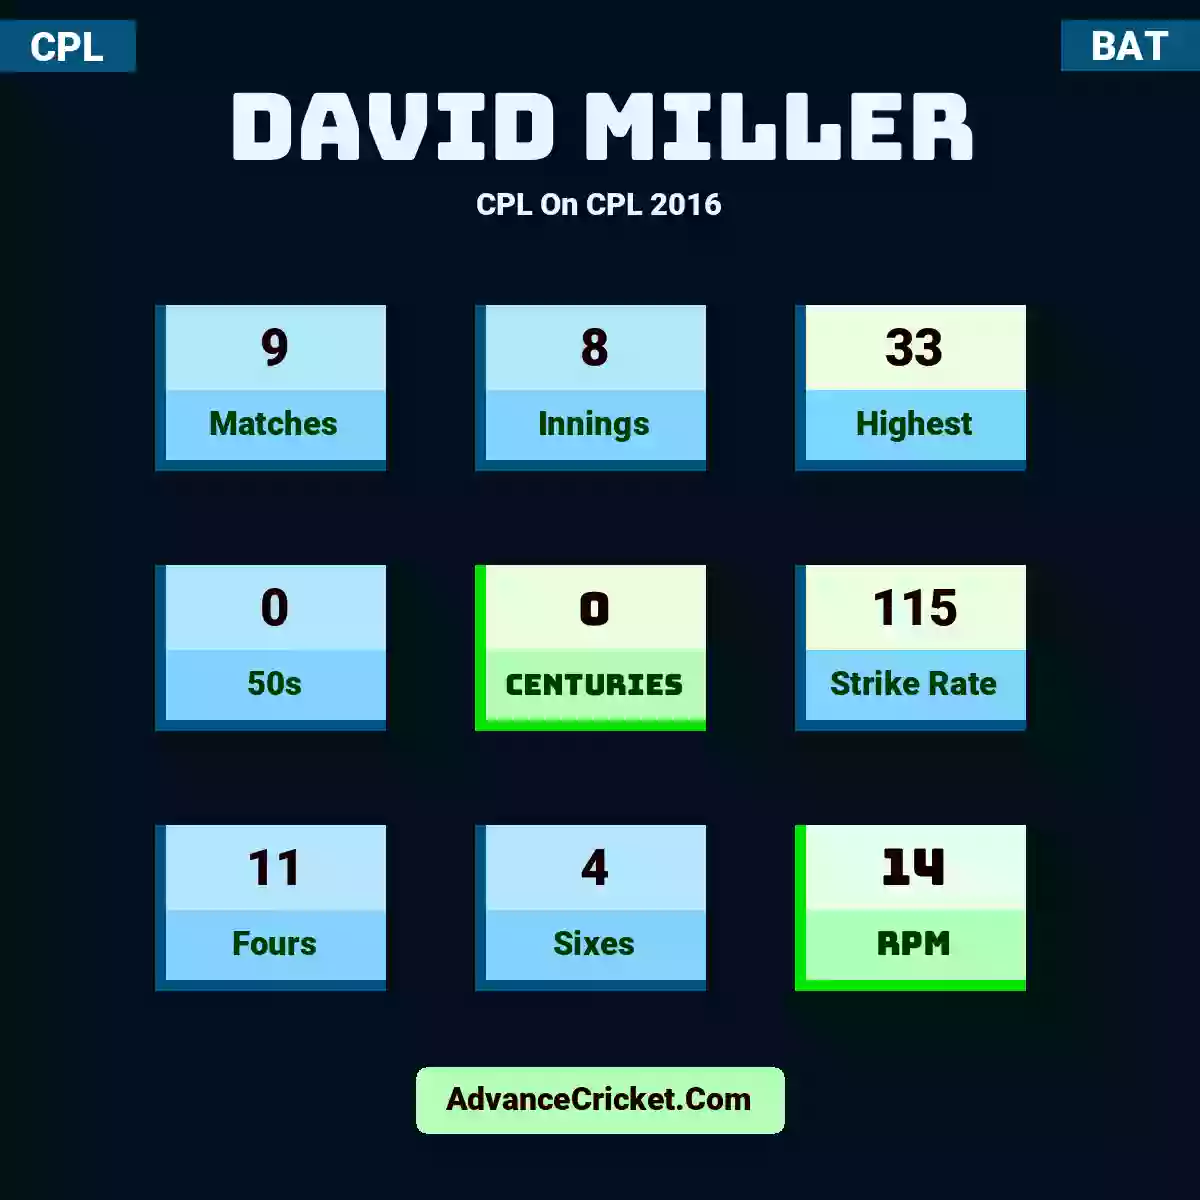 David Miller CPL  On CPL 2016, David Miller played 9 matches, scored 33 runs as highest, 0 half-centuries, and 0 centuries, with a strike rate of 115. D.Miller hit 11 fours and 4 sixes, with an RPM of 14.